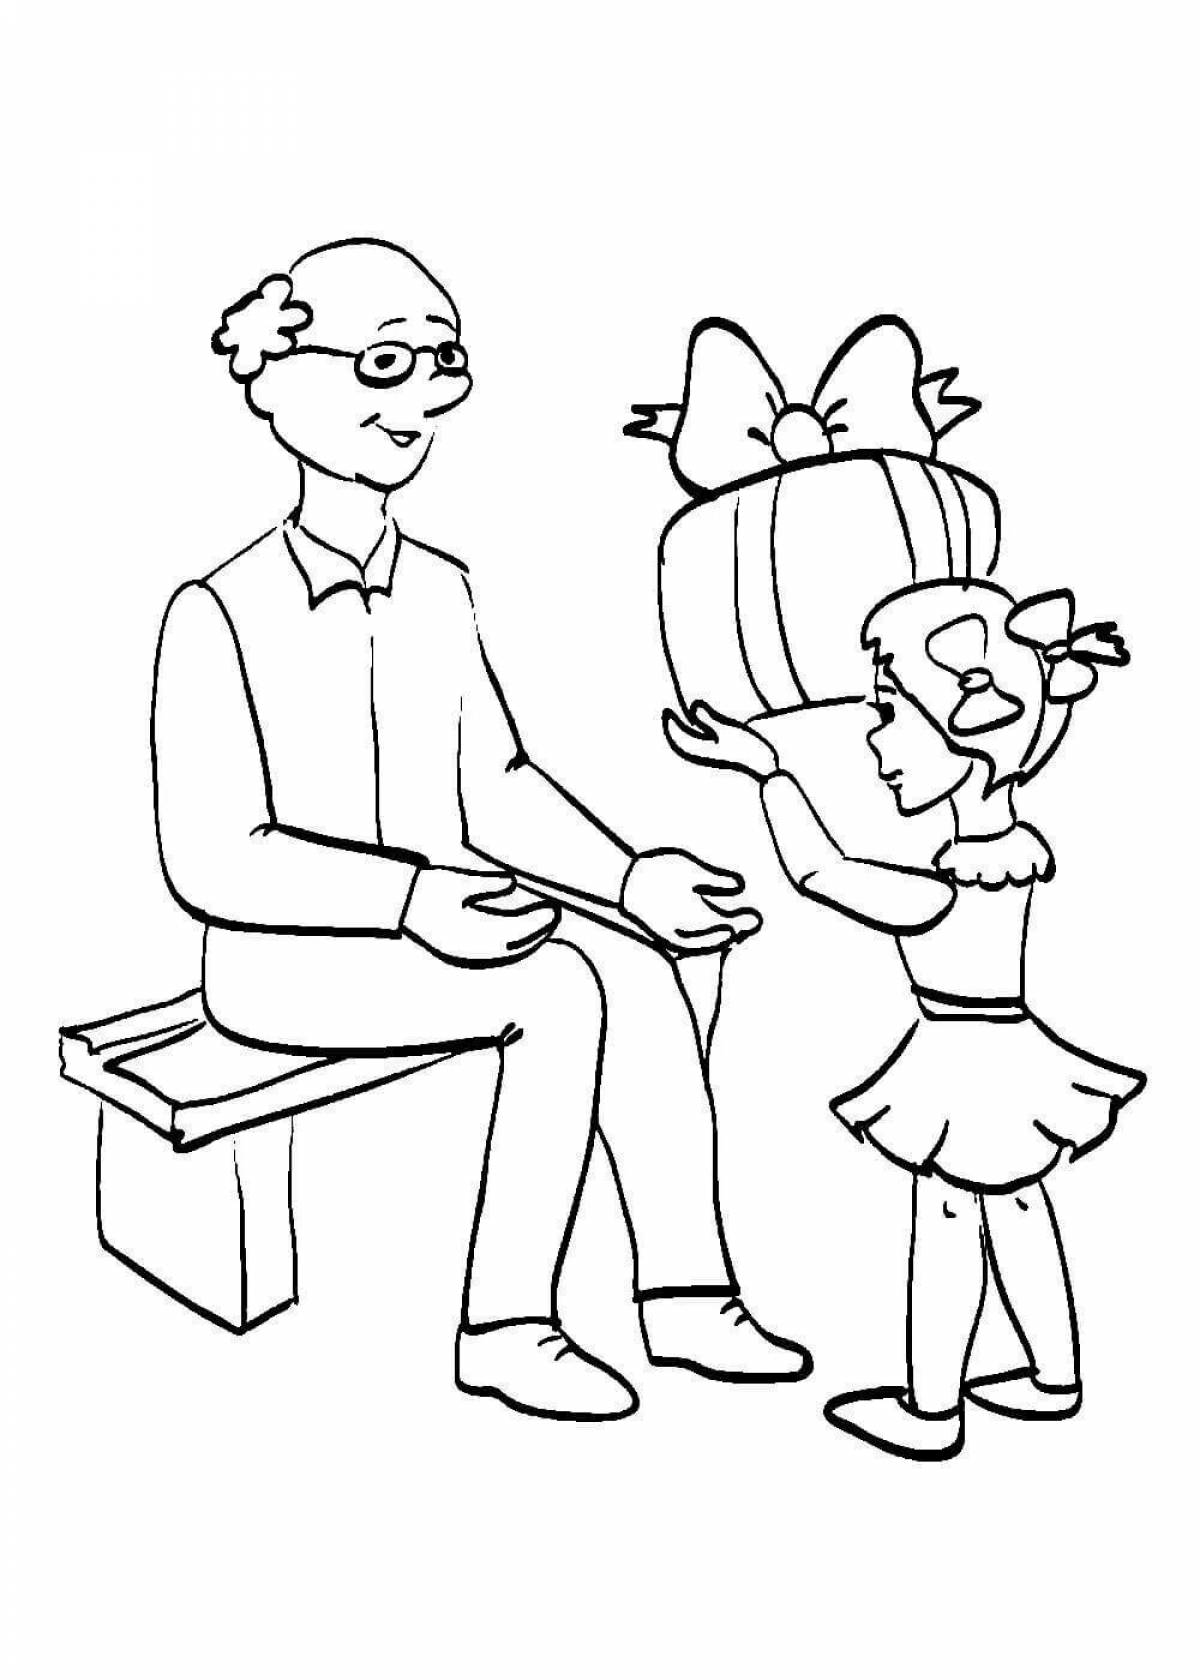 Adorable grandfather and granddaughter coloring book